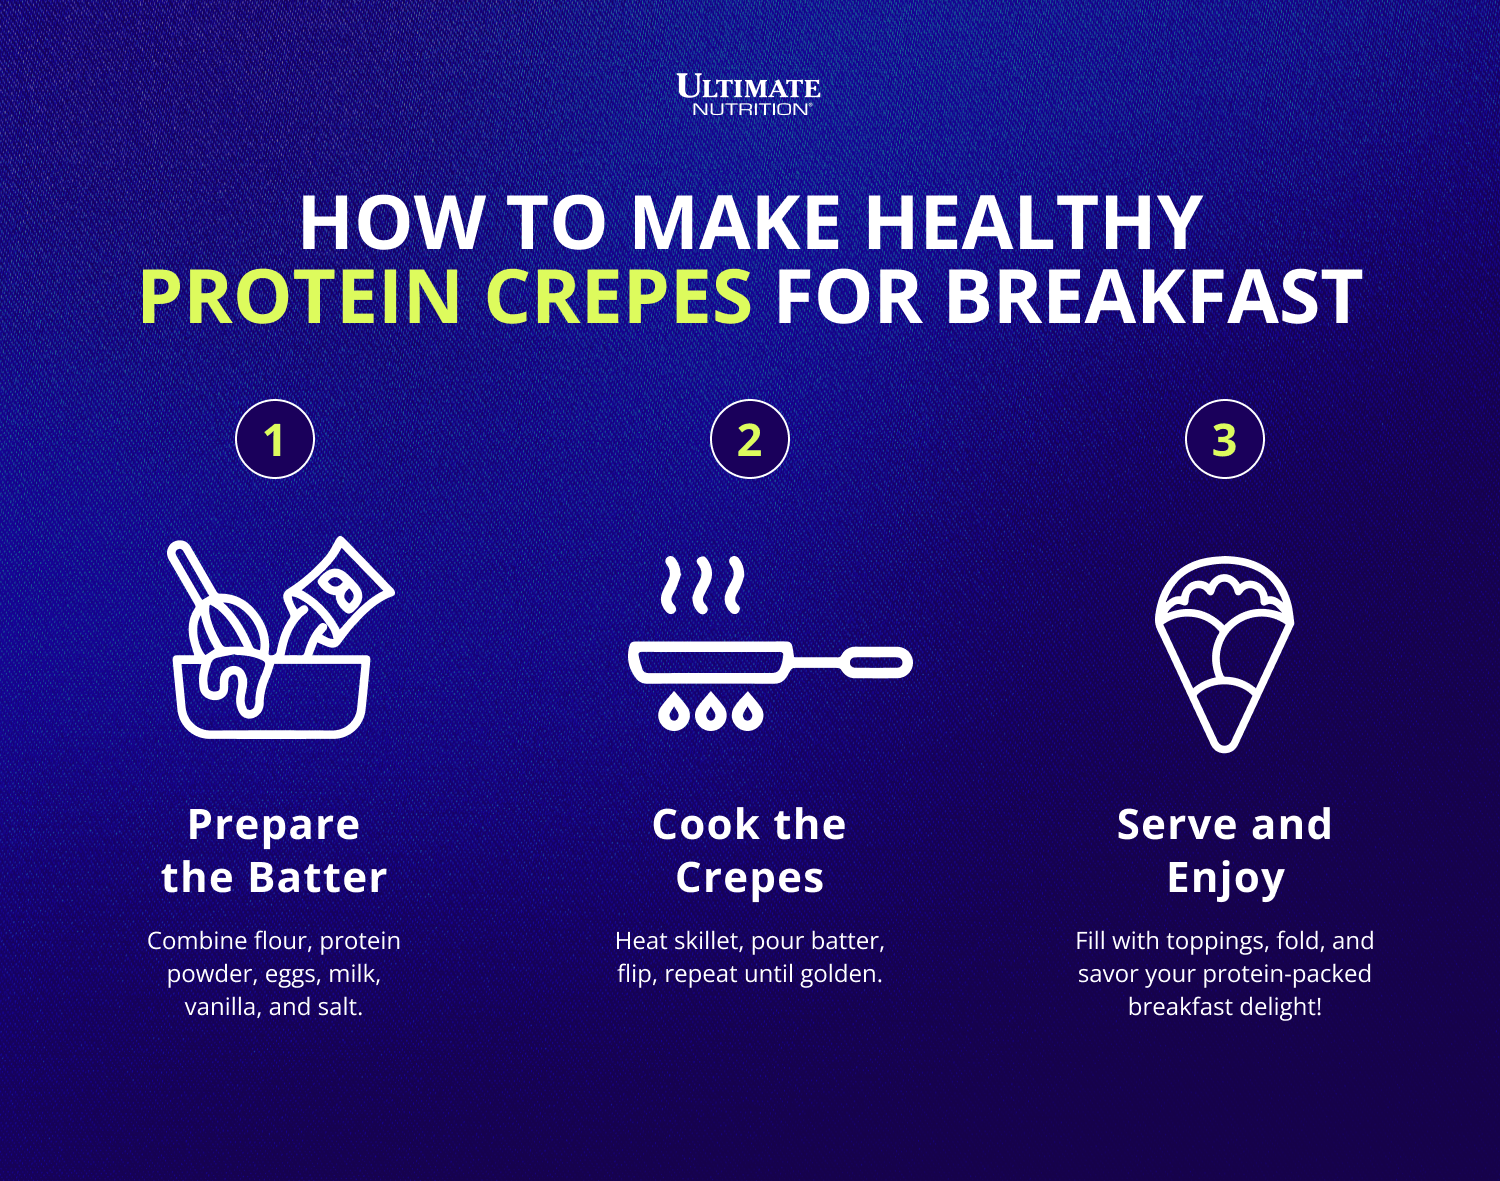 How to Make Healthy Protein Crepes for Breakfast Infographic | Ultimate Nutrition